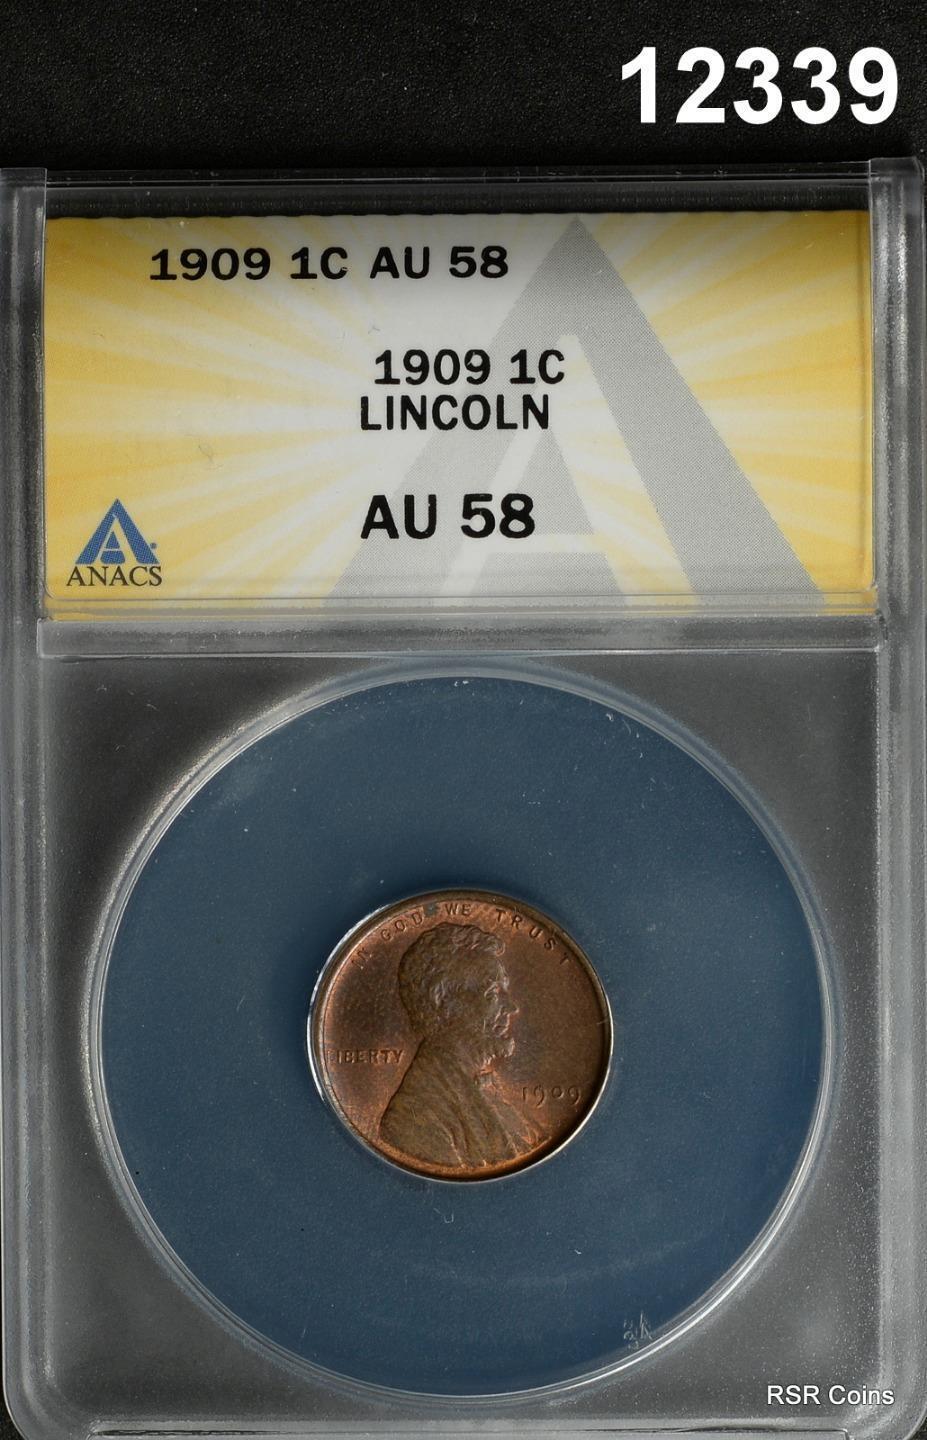 1909 LINCOLN CENT ANACS CERTIFIED AU58 NICE! #12339